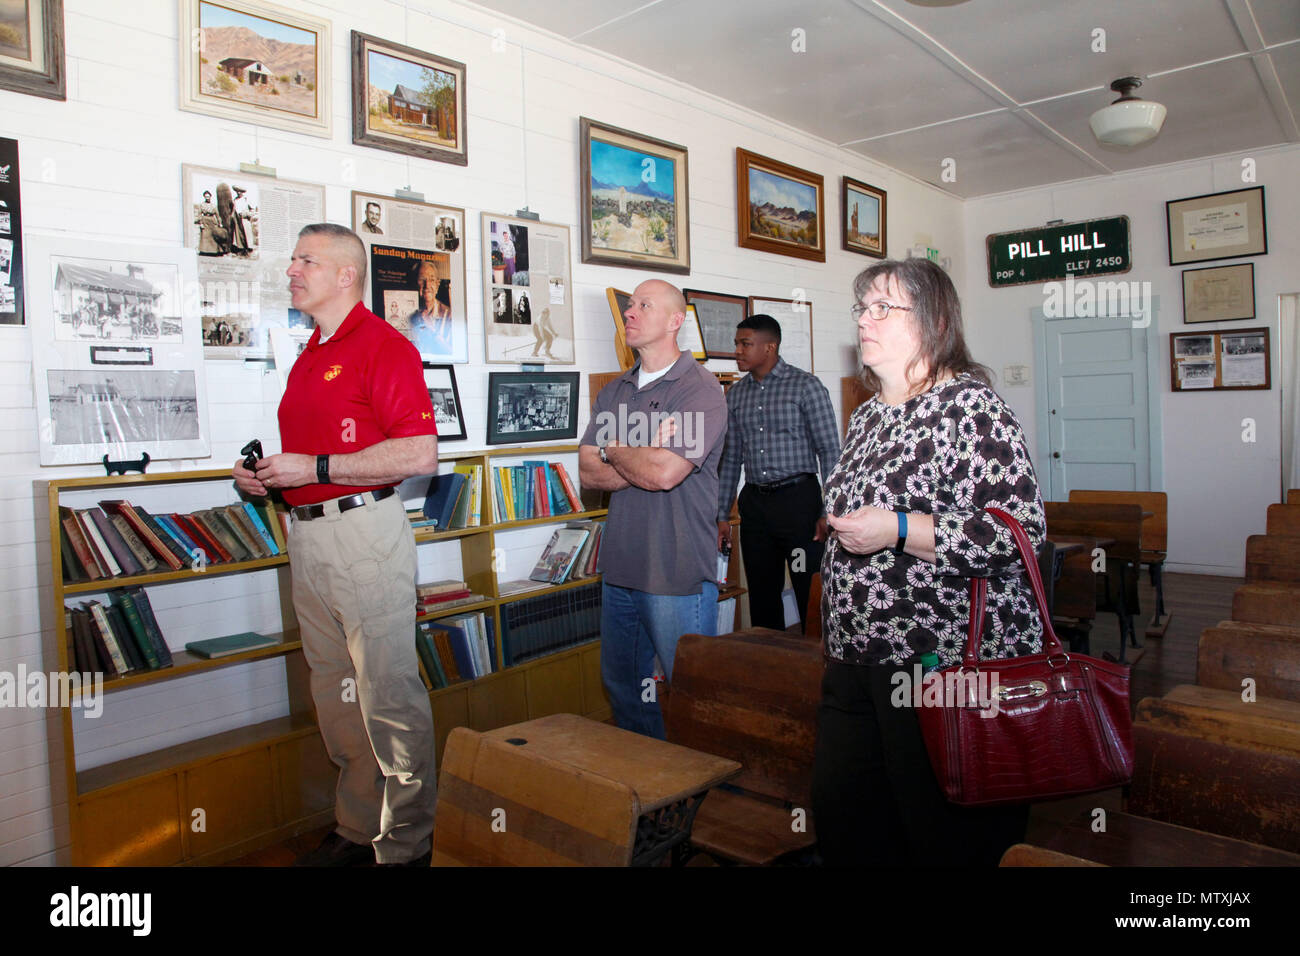 Brig. Gen. William F. Mullen III, Combat Center Commanding General, left; Sgt. Maj. Michael J. Hendges, Combat Center Sergeant Major; Cpl. Ben Mills, driver; and Vicki Mullen listen to Twentynine Palms Historical Society volunteer Pat Rimmington during a tour of the Old Schoolhouse Museum in Twentynine Palms, Calif., Jan. 31, 2017. The four toured the facility with Jim Ricker, Combat Center Assistant Chief of Staff for Government and External Affairs; and Kristina Becker, Combat Center External Affairs Director. (Official Marine Corps photo by Kelly O'Sullivan/Released) Stock Photo